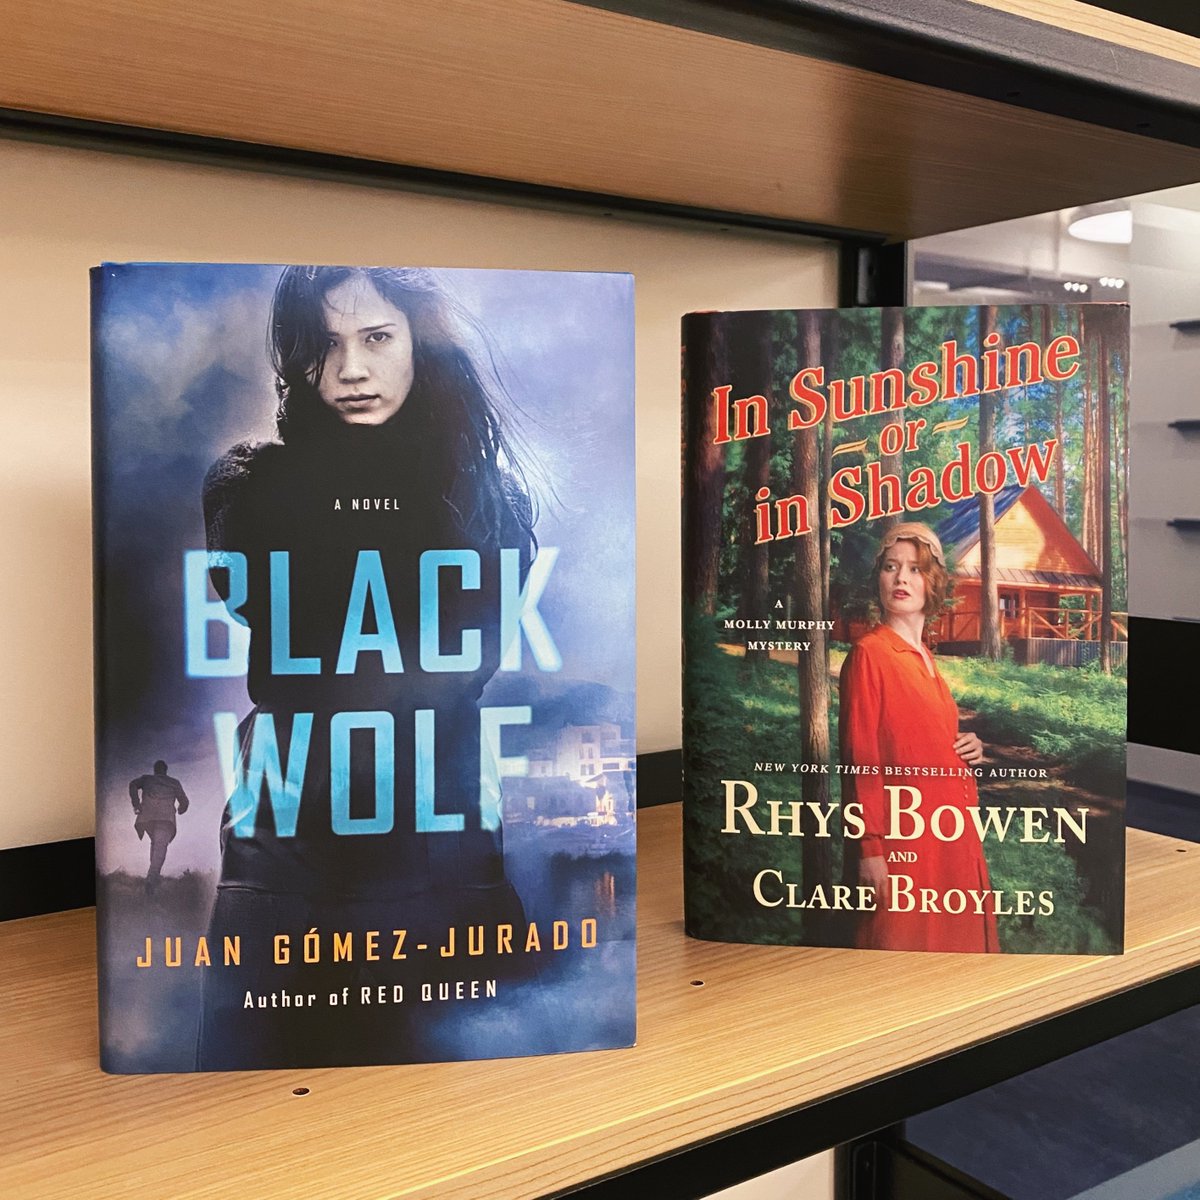 Happy #pubday to IN SUNSHINE OR IN SHADOW by @Rhysbowen and Clare Broyles, and to BLACK WOLF by Juan Gómez-Jurado ! Look for them in the finest of bookstores!